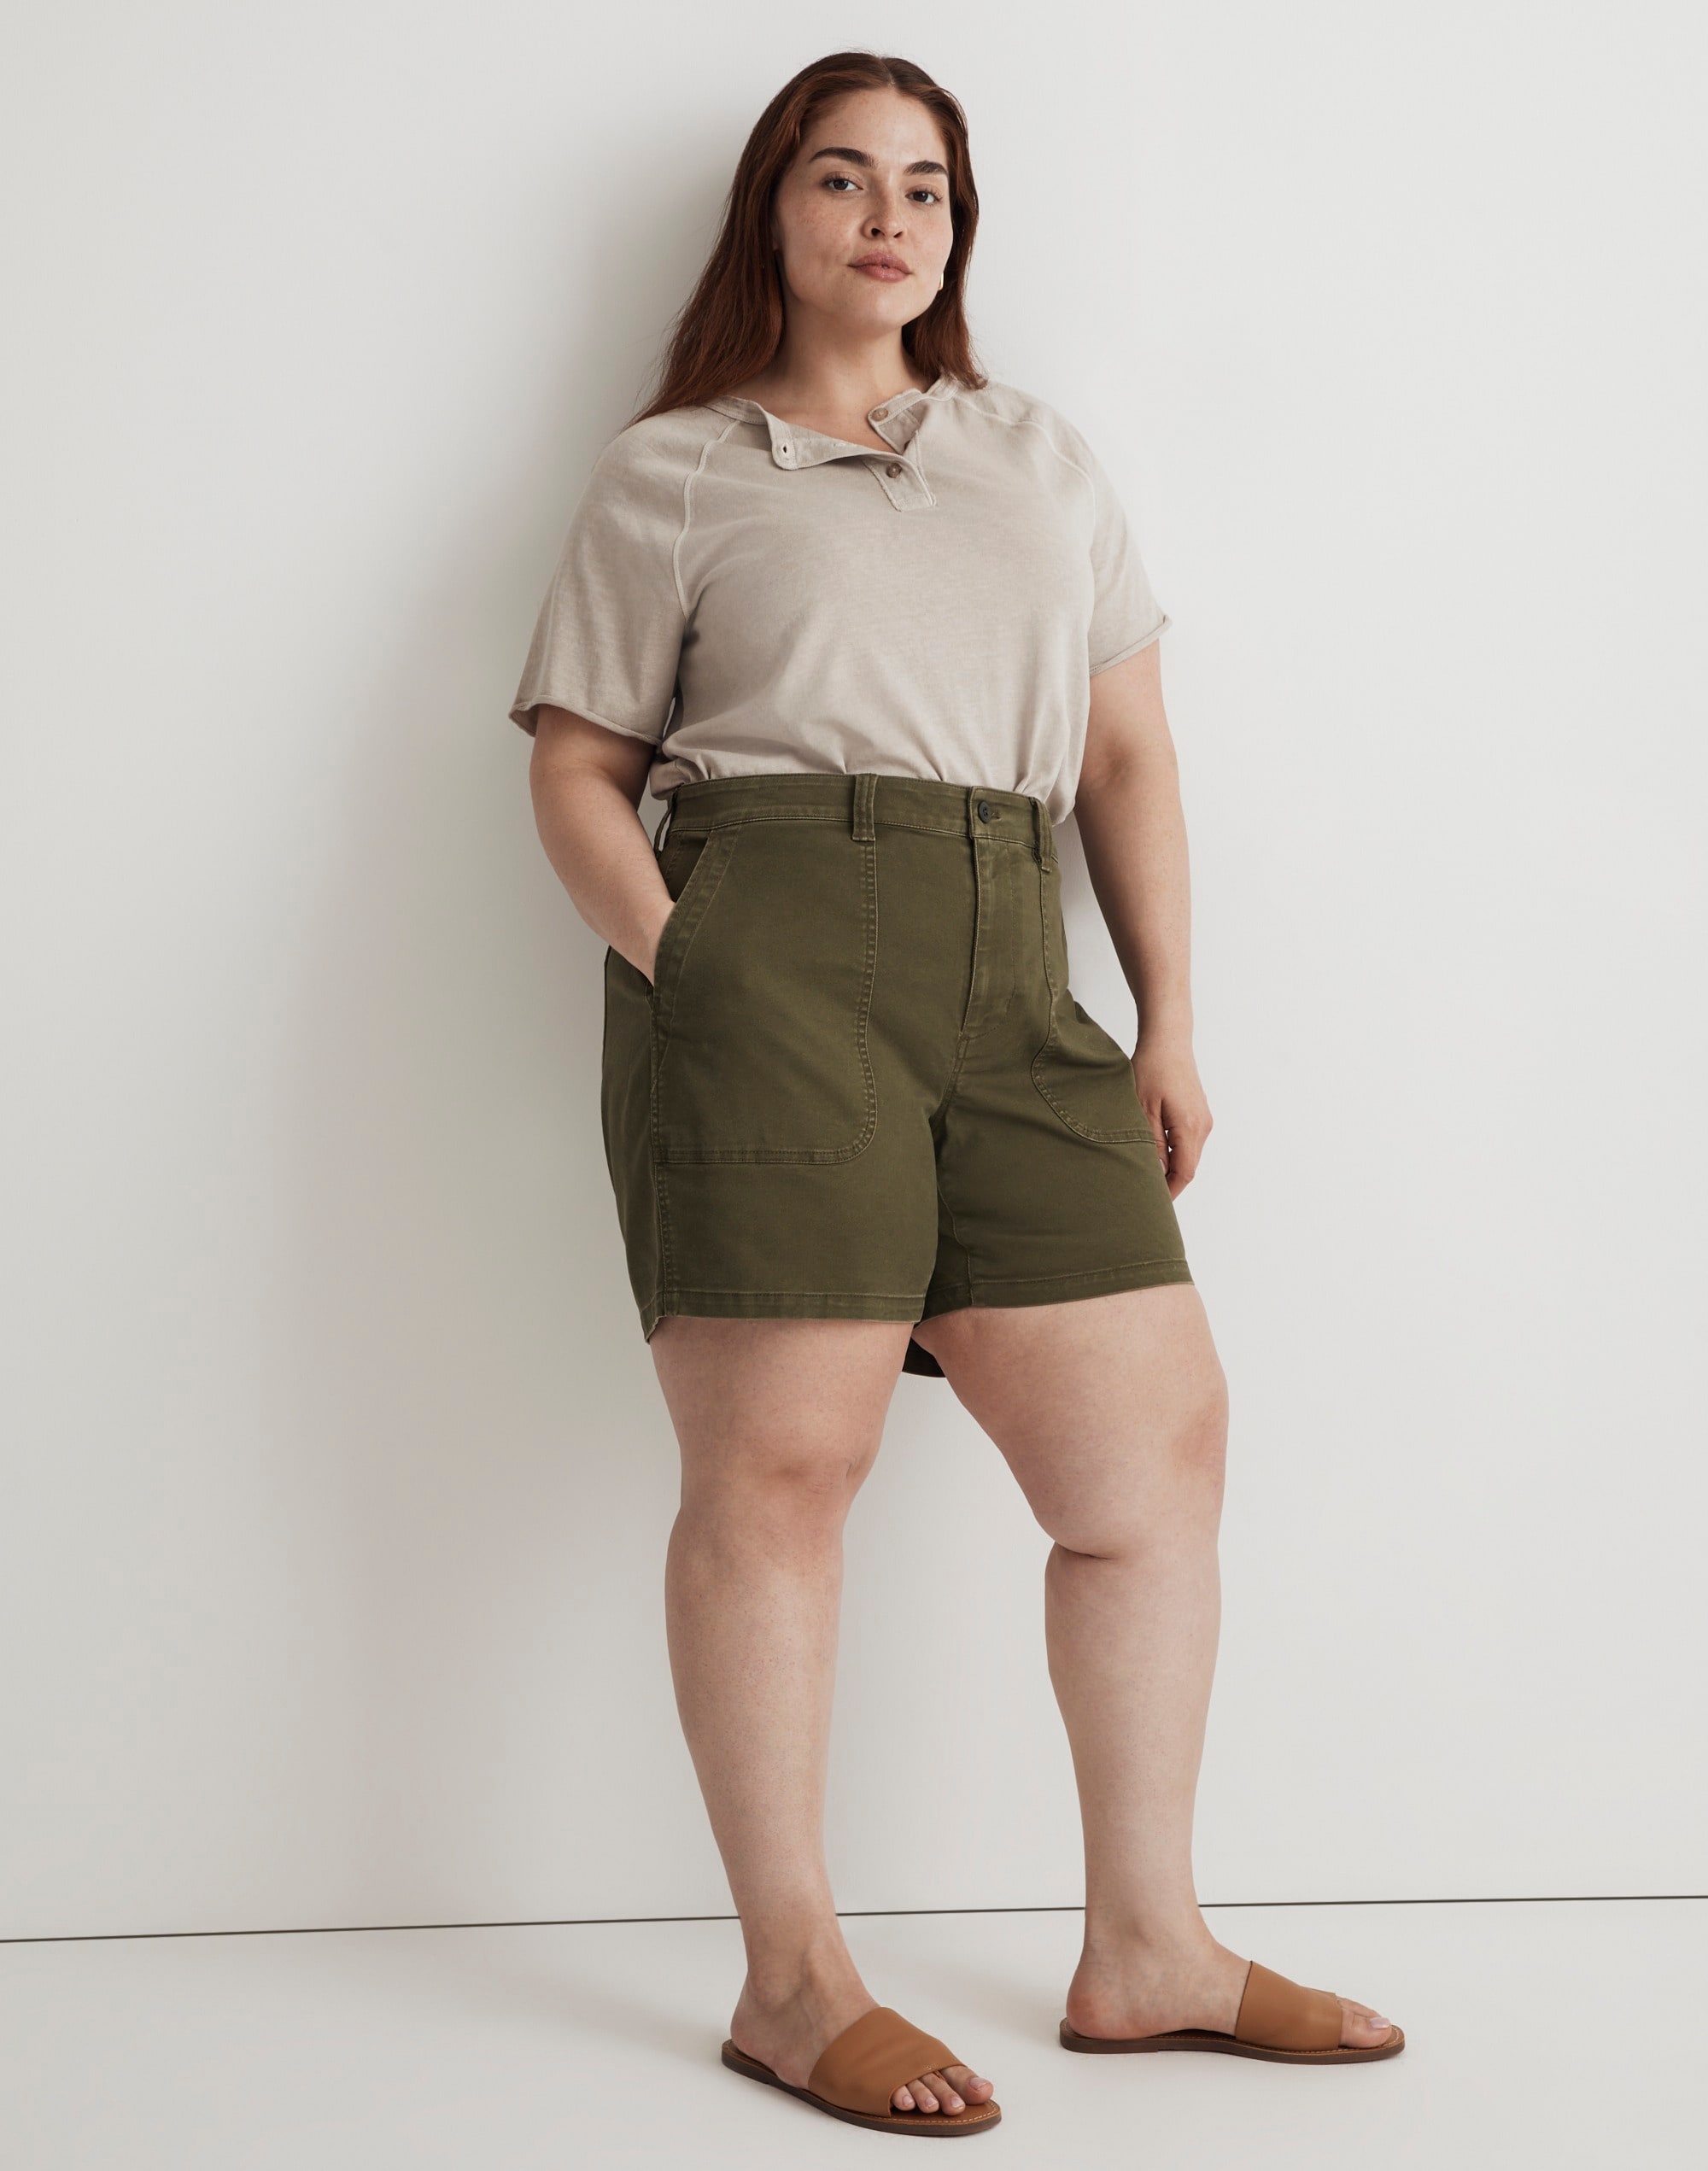 The Plus Perfect Fatigue Mid-Length Short